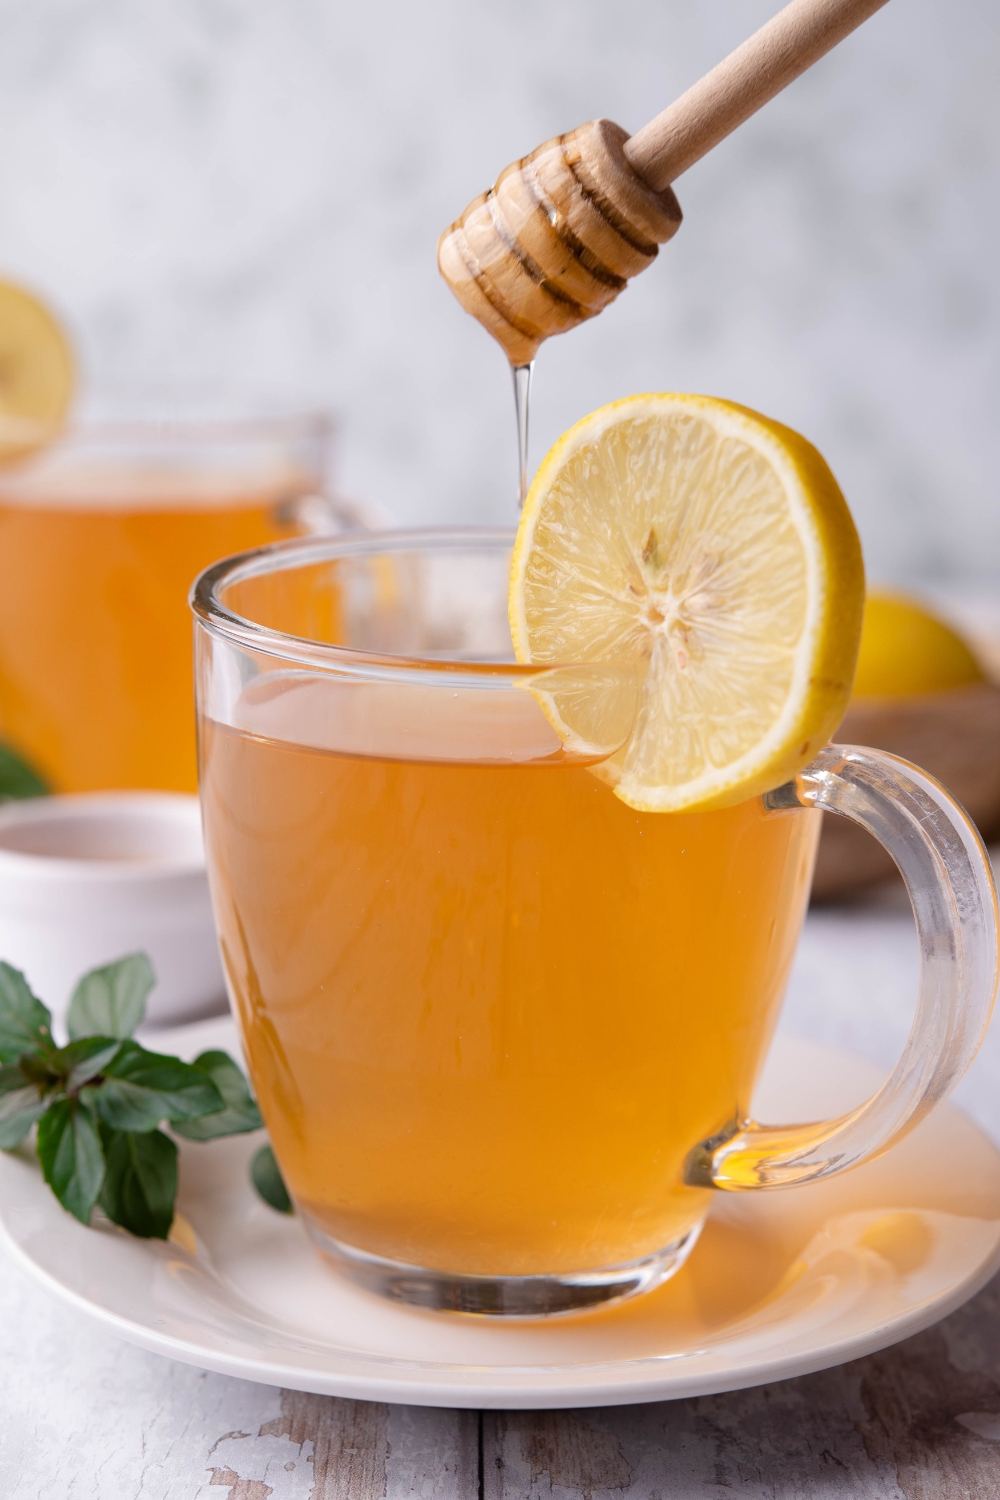 A clear mug with medicine ball tea in it, a slice of lemon is garnished on the side. A honey stick is drizzling honey into the tea.